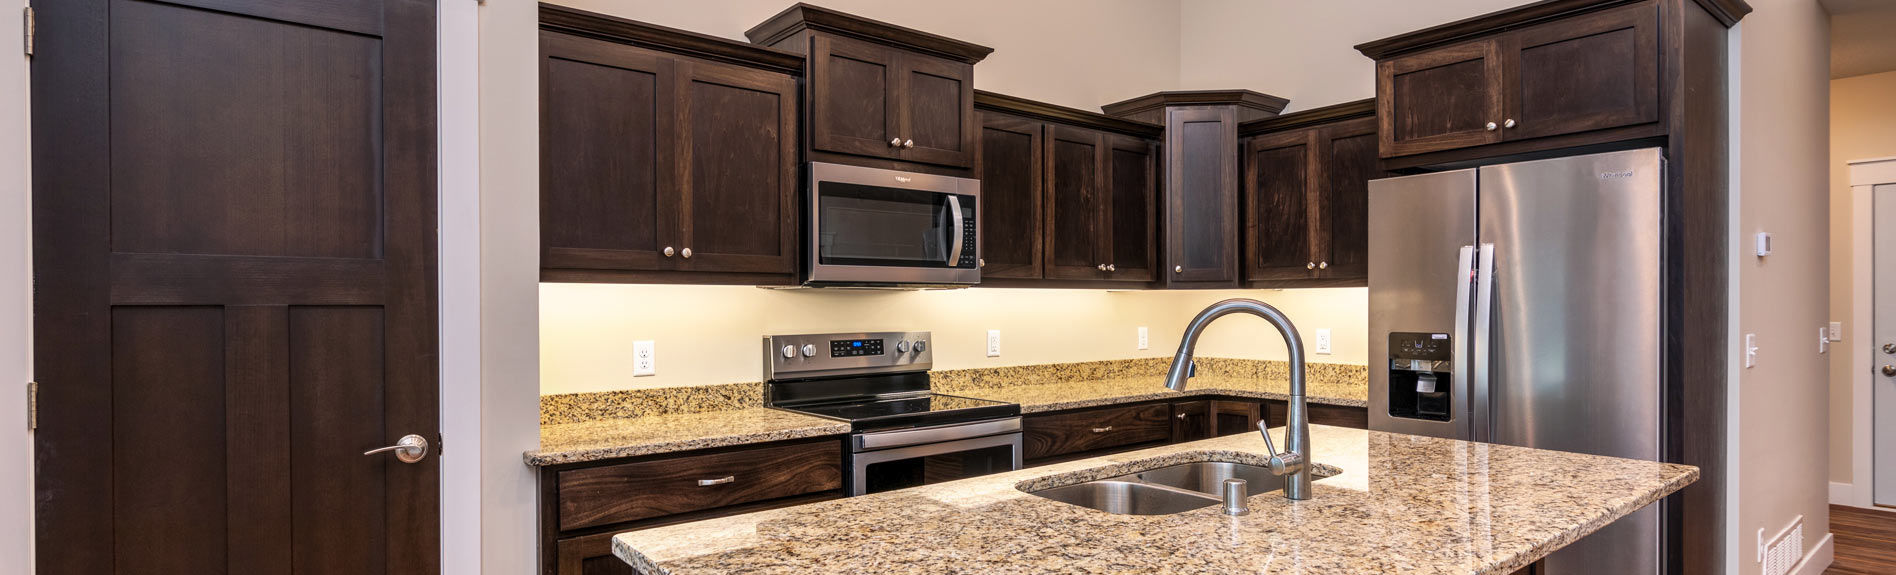 Custom Kitchens by DHC of the Lakes Area General Contractor - Minnesota